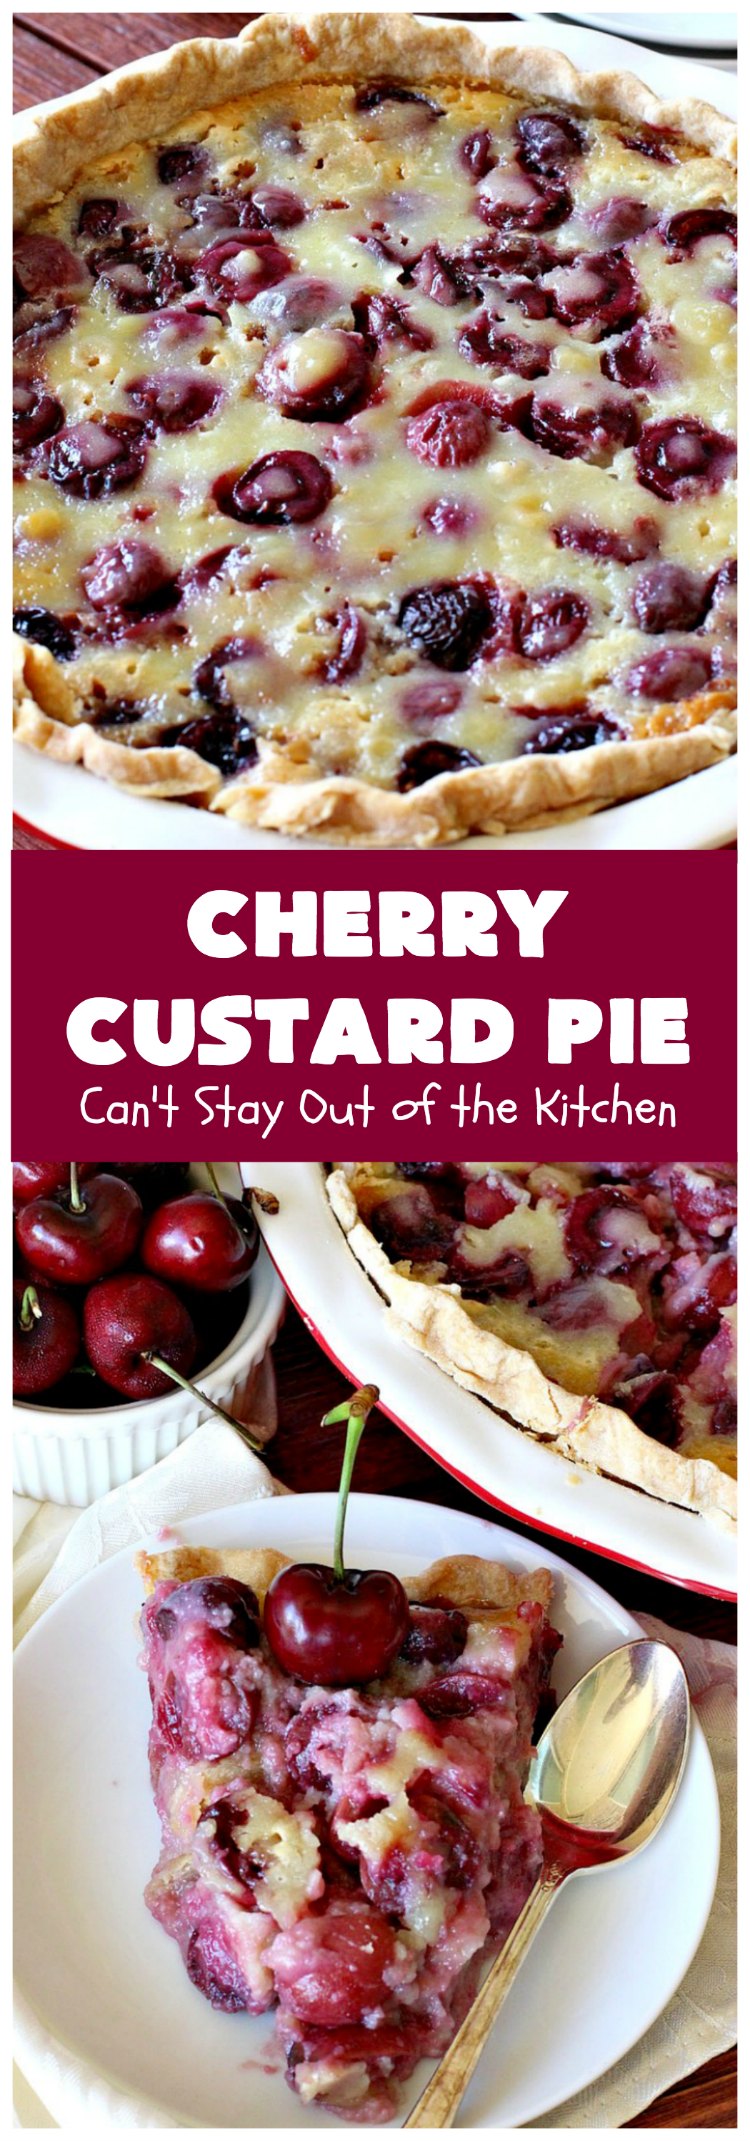 Cherry Custard Pie | Can't Stay Out of the KitchenCherry Custard Pie | Can't Stay Out of the Kitchen